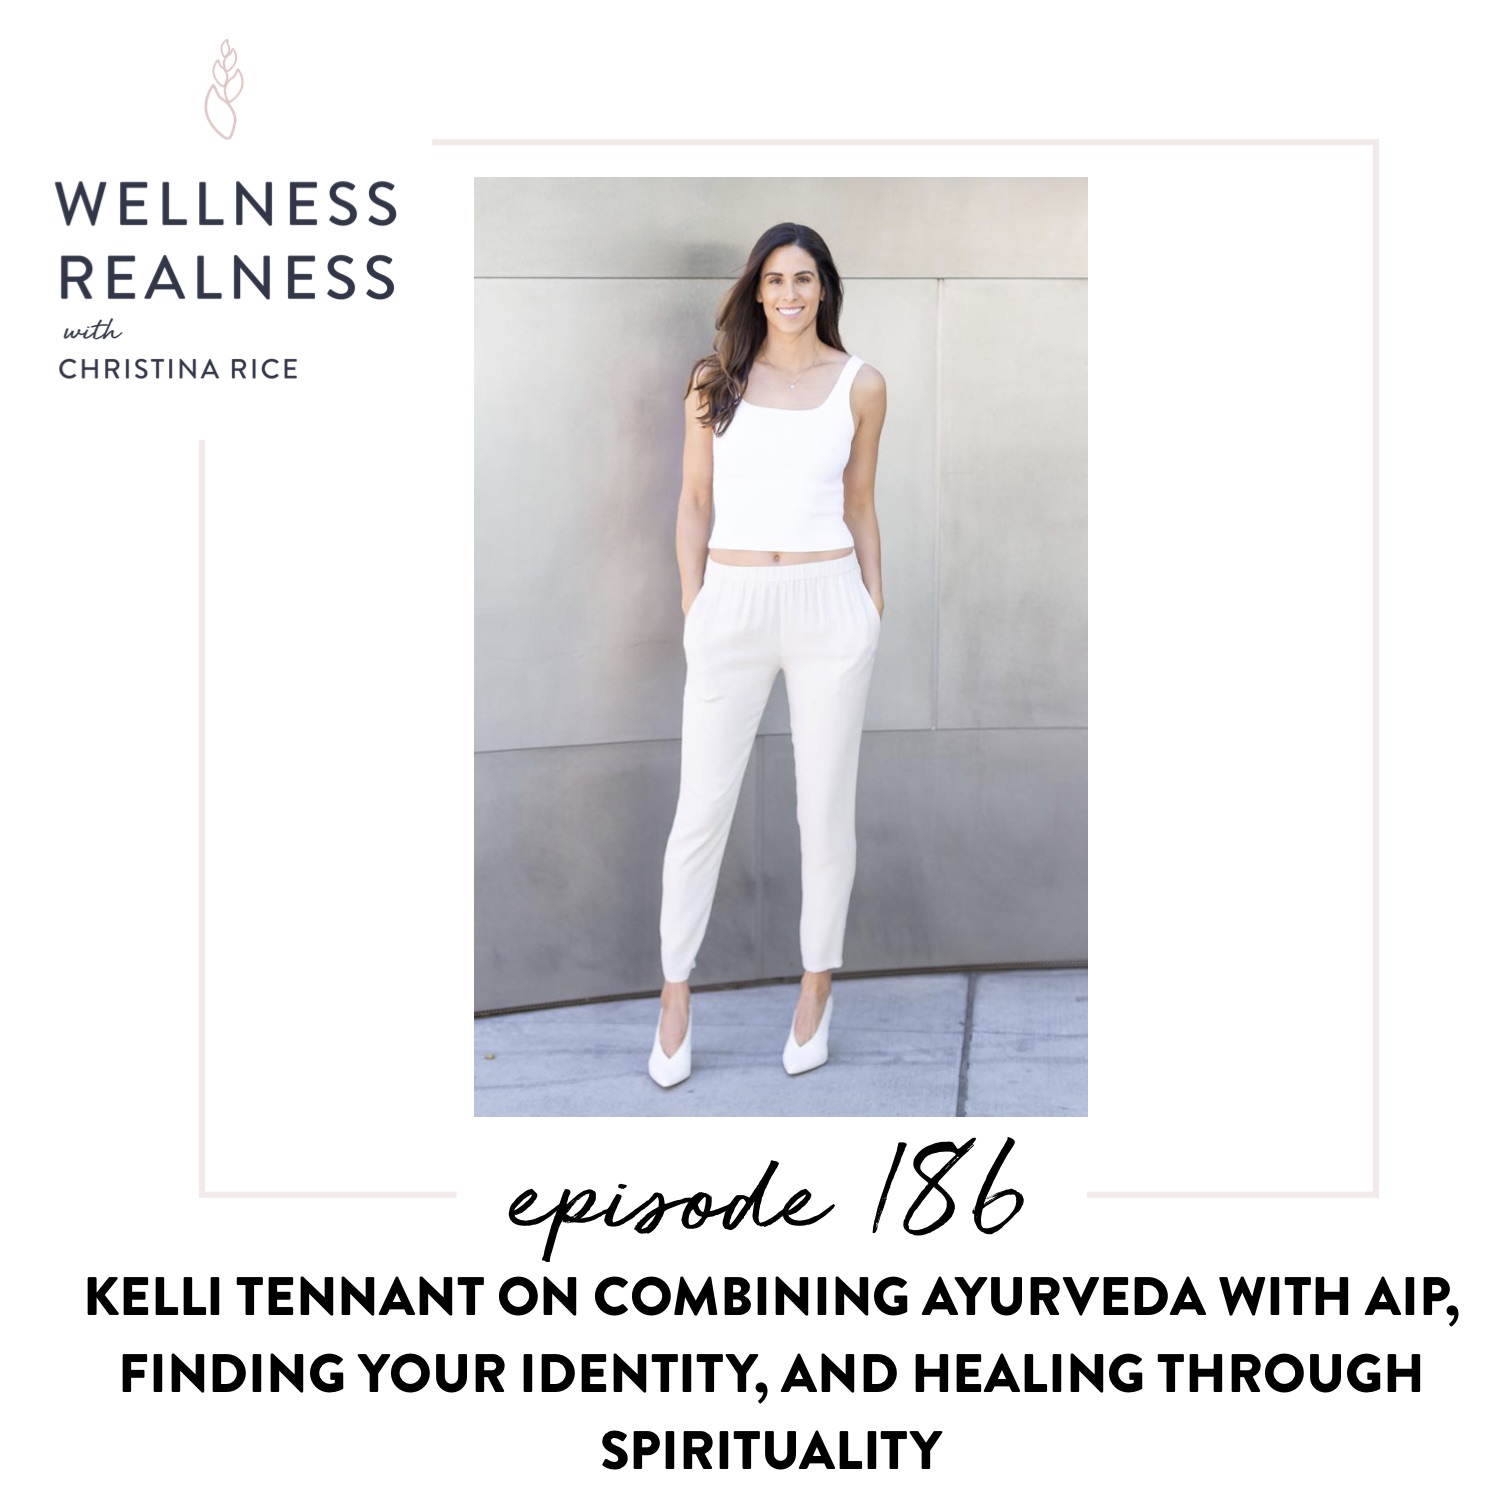 186: Kelli Tennant on Combining Ayurveda with AIP, Finding Your Identity, and Healing Through Spirituality